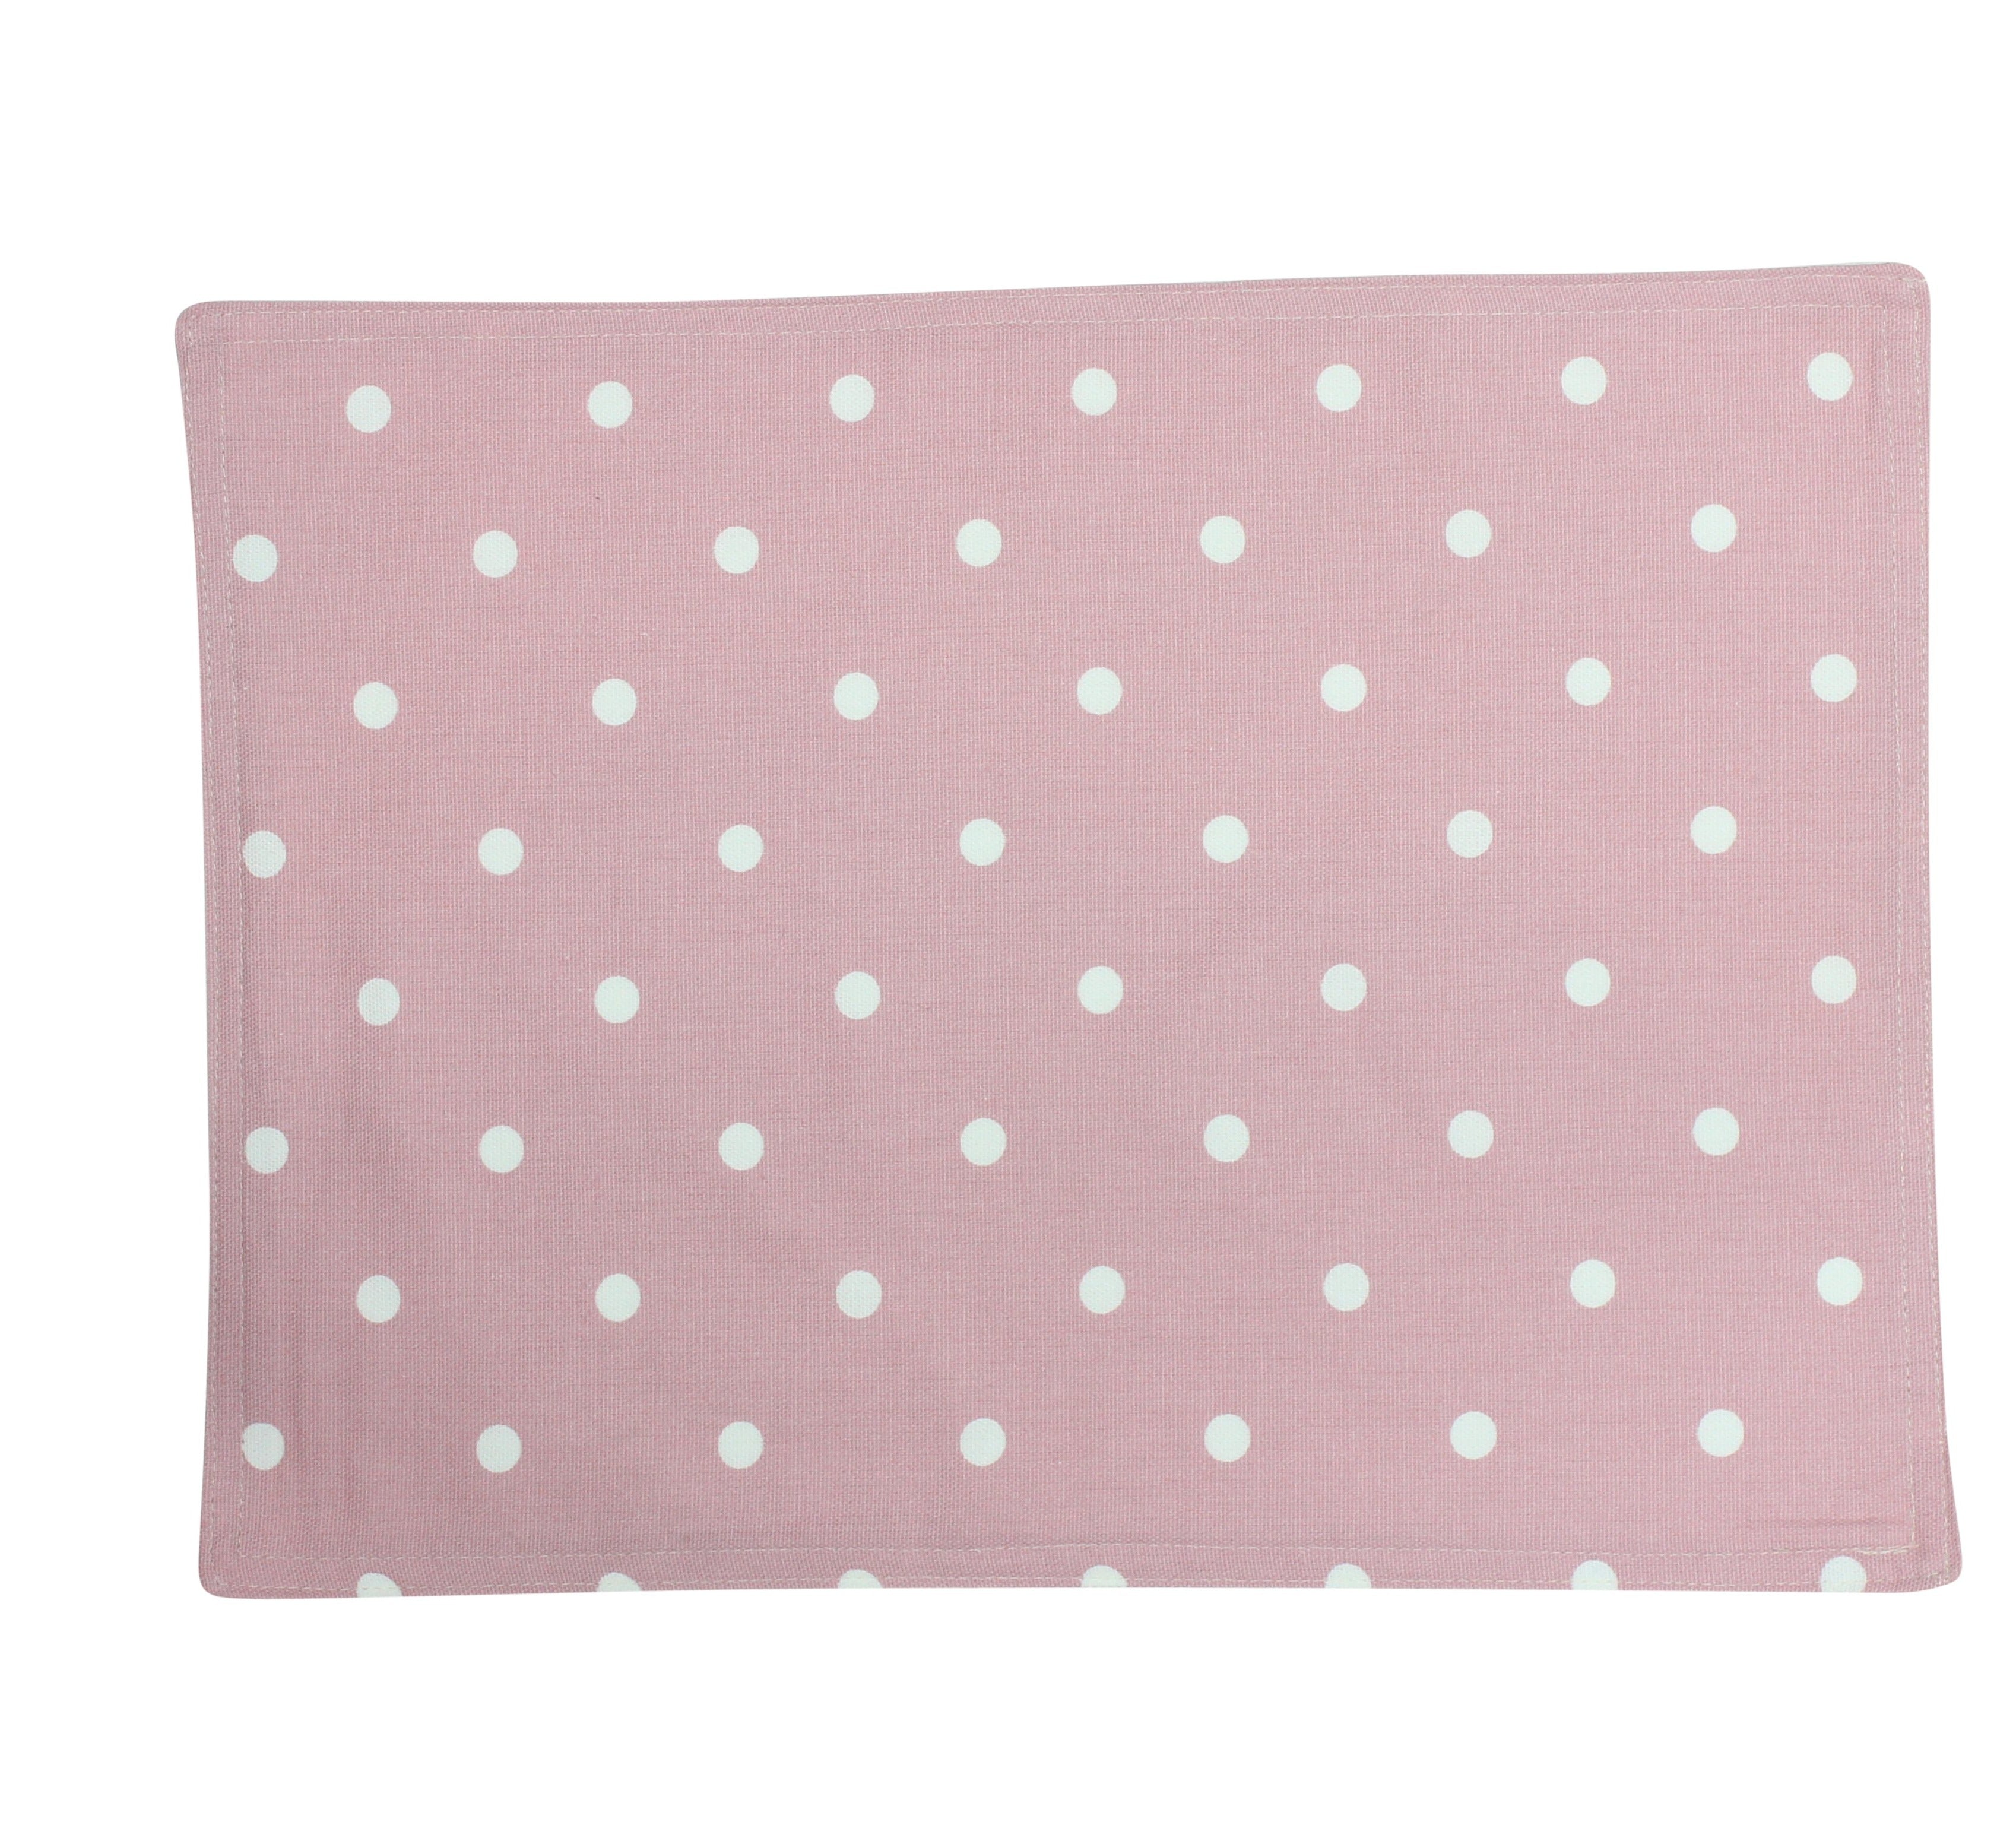 Dotty Pink Fabric Placemat